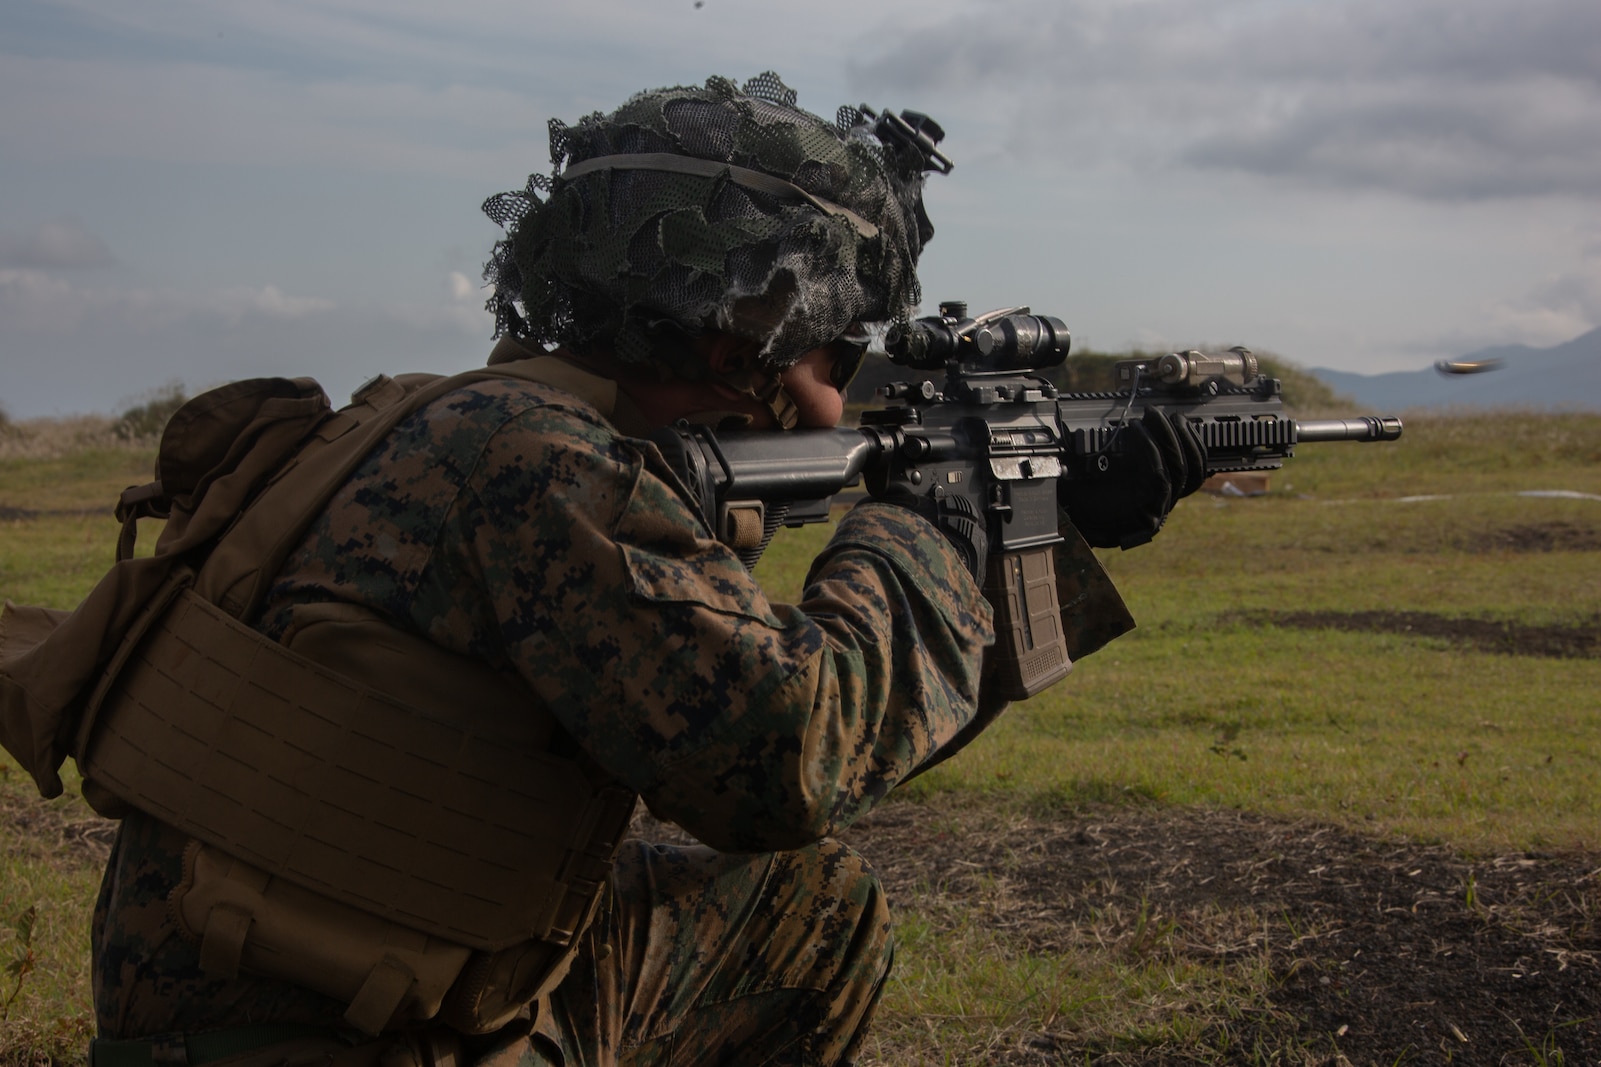 U.S. Marine Corps Cpl. Jon-Michael Formway, a team leader with 2d Battalion, 3d Marines, 3d Marine Division conduct combat marksmanship training at Combined Arms Training Center, Camp Fuji, Japan, Oct. 5, 2021. During this exercise Marines sharpened critical combined arms skills, ensuring they are ready and capable to execute a wide range of missions anywhere in the world. 2/3 is forward deployed under 4th Marines as part of the Unit Deployment Program. Formway is a native of Lake Forest, California. (U.S. Marine Corps photo by Lance Cpl. Kree Laing)